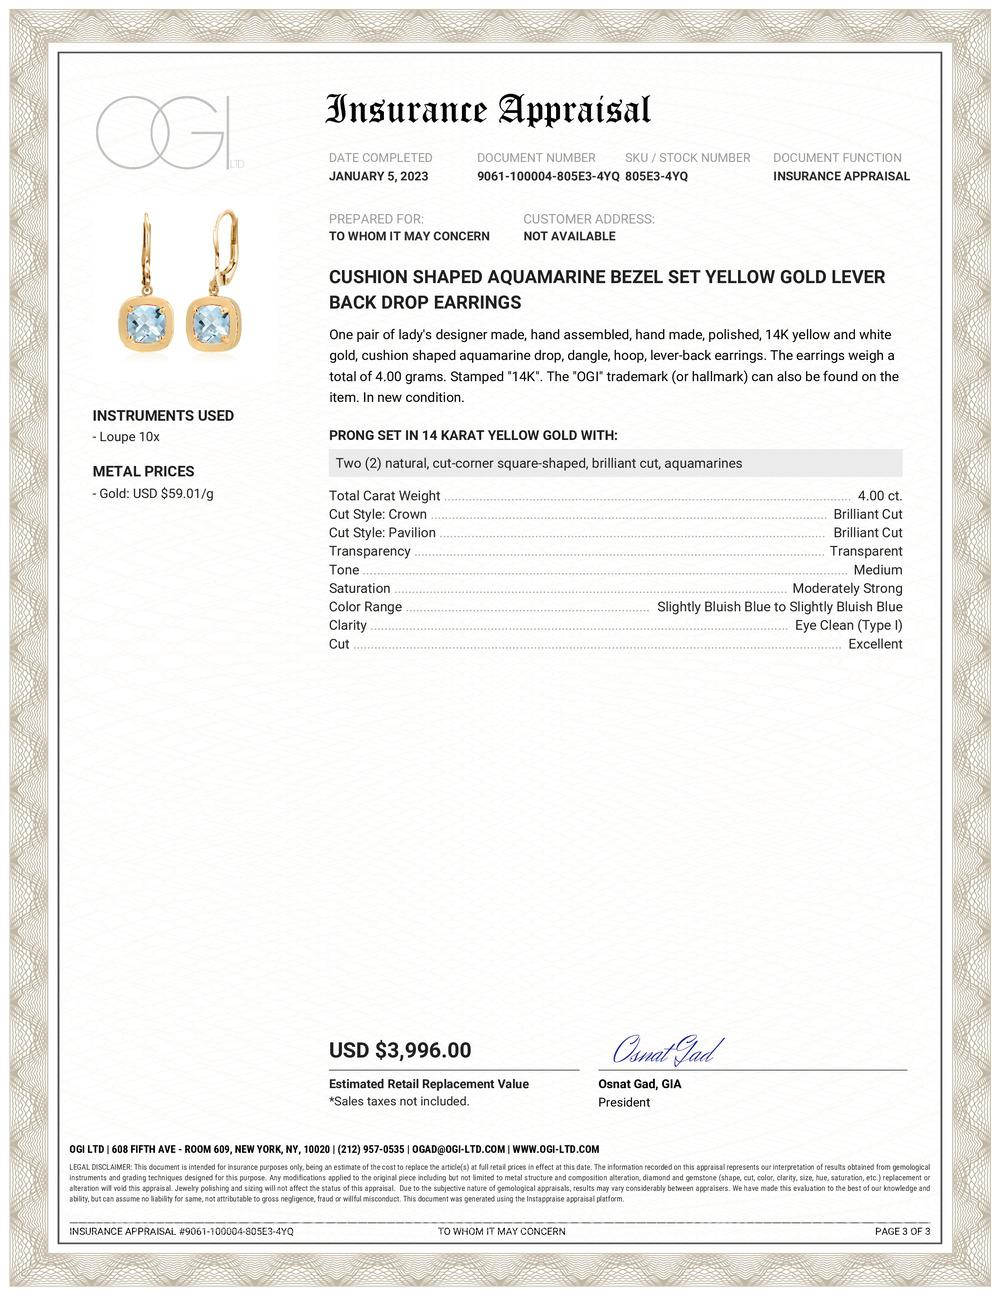 Fourteen karat drop yellow gold hoop lever back earrings
Two matched cushion-shaped aquamarine weighing 4 carats
Earrings measuring 1.15 inch in length and 0.50 inch in width 
New Earrings
Handmade in the USA
Some gemstones are very hard to match.